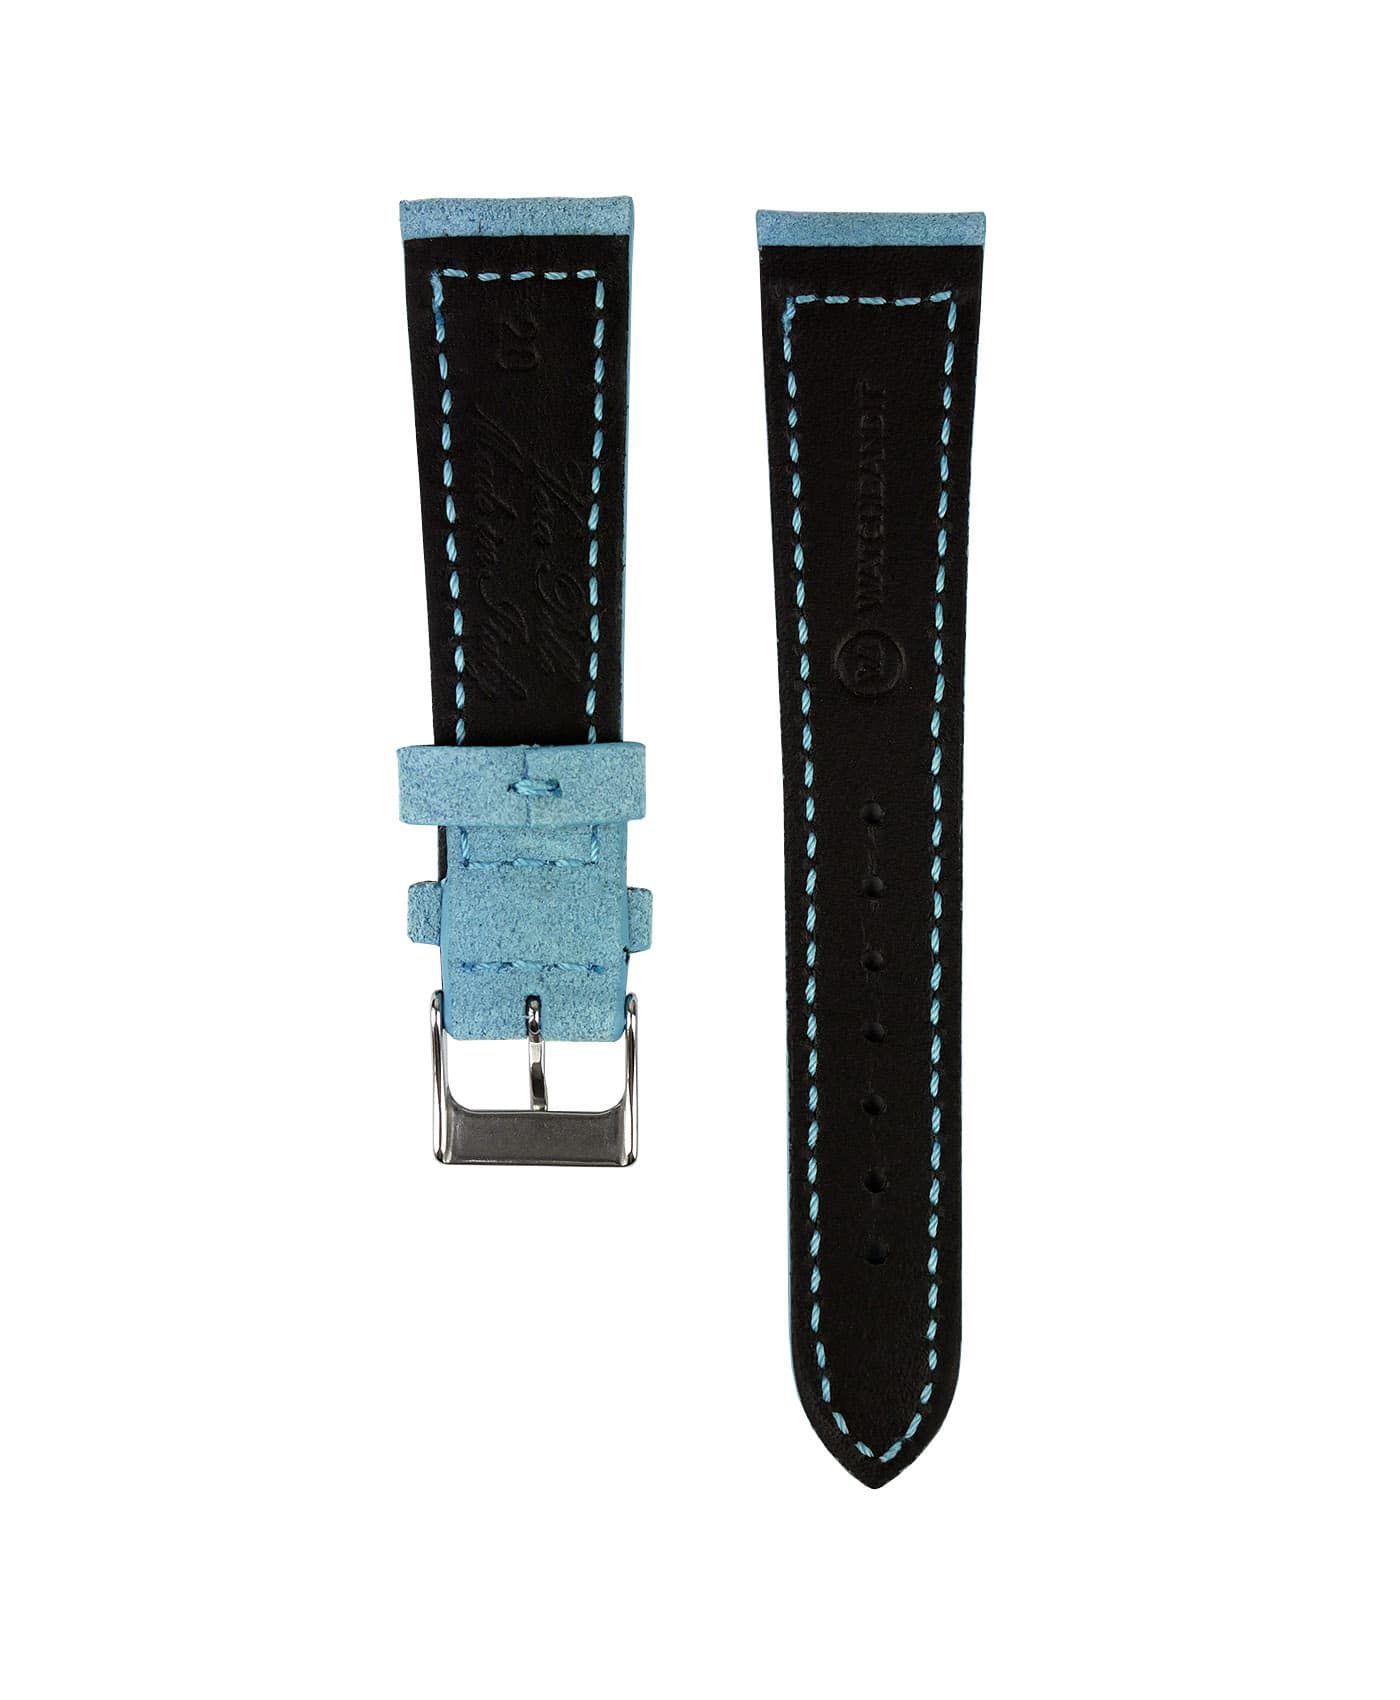 Suede leather strap with side seam_light blue_back